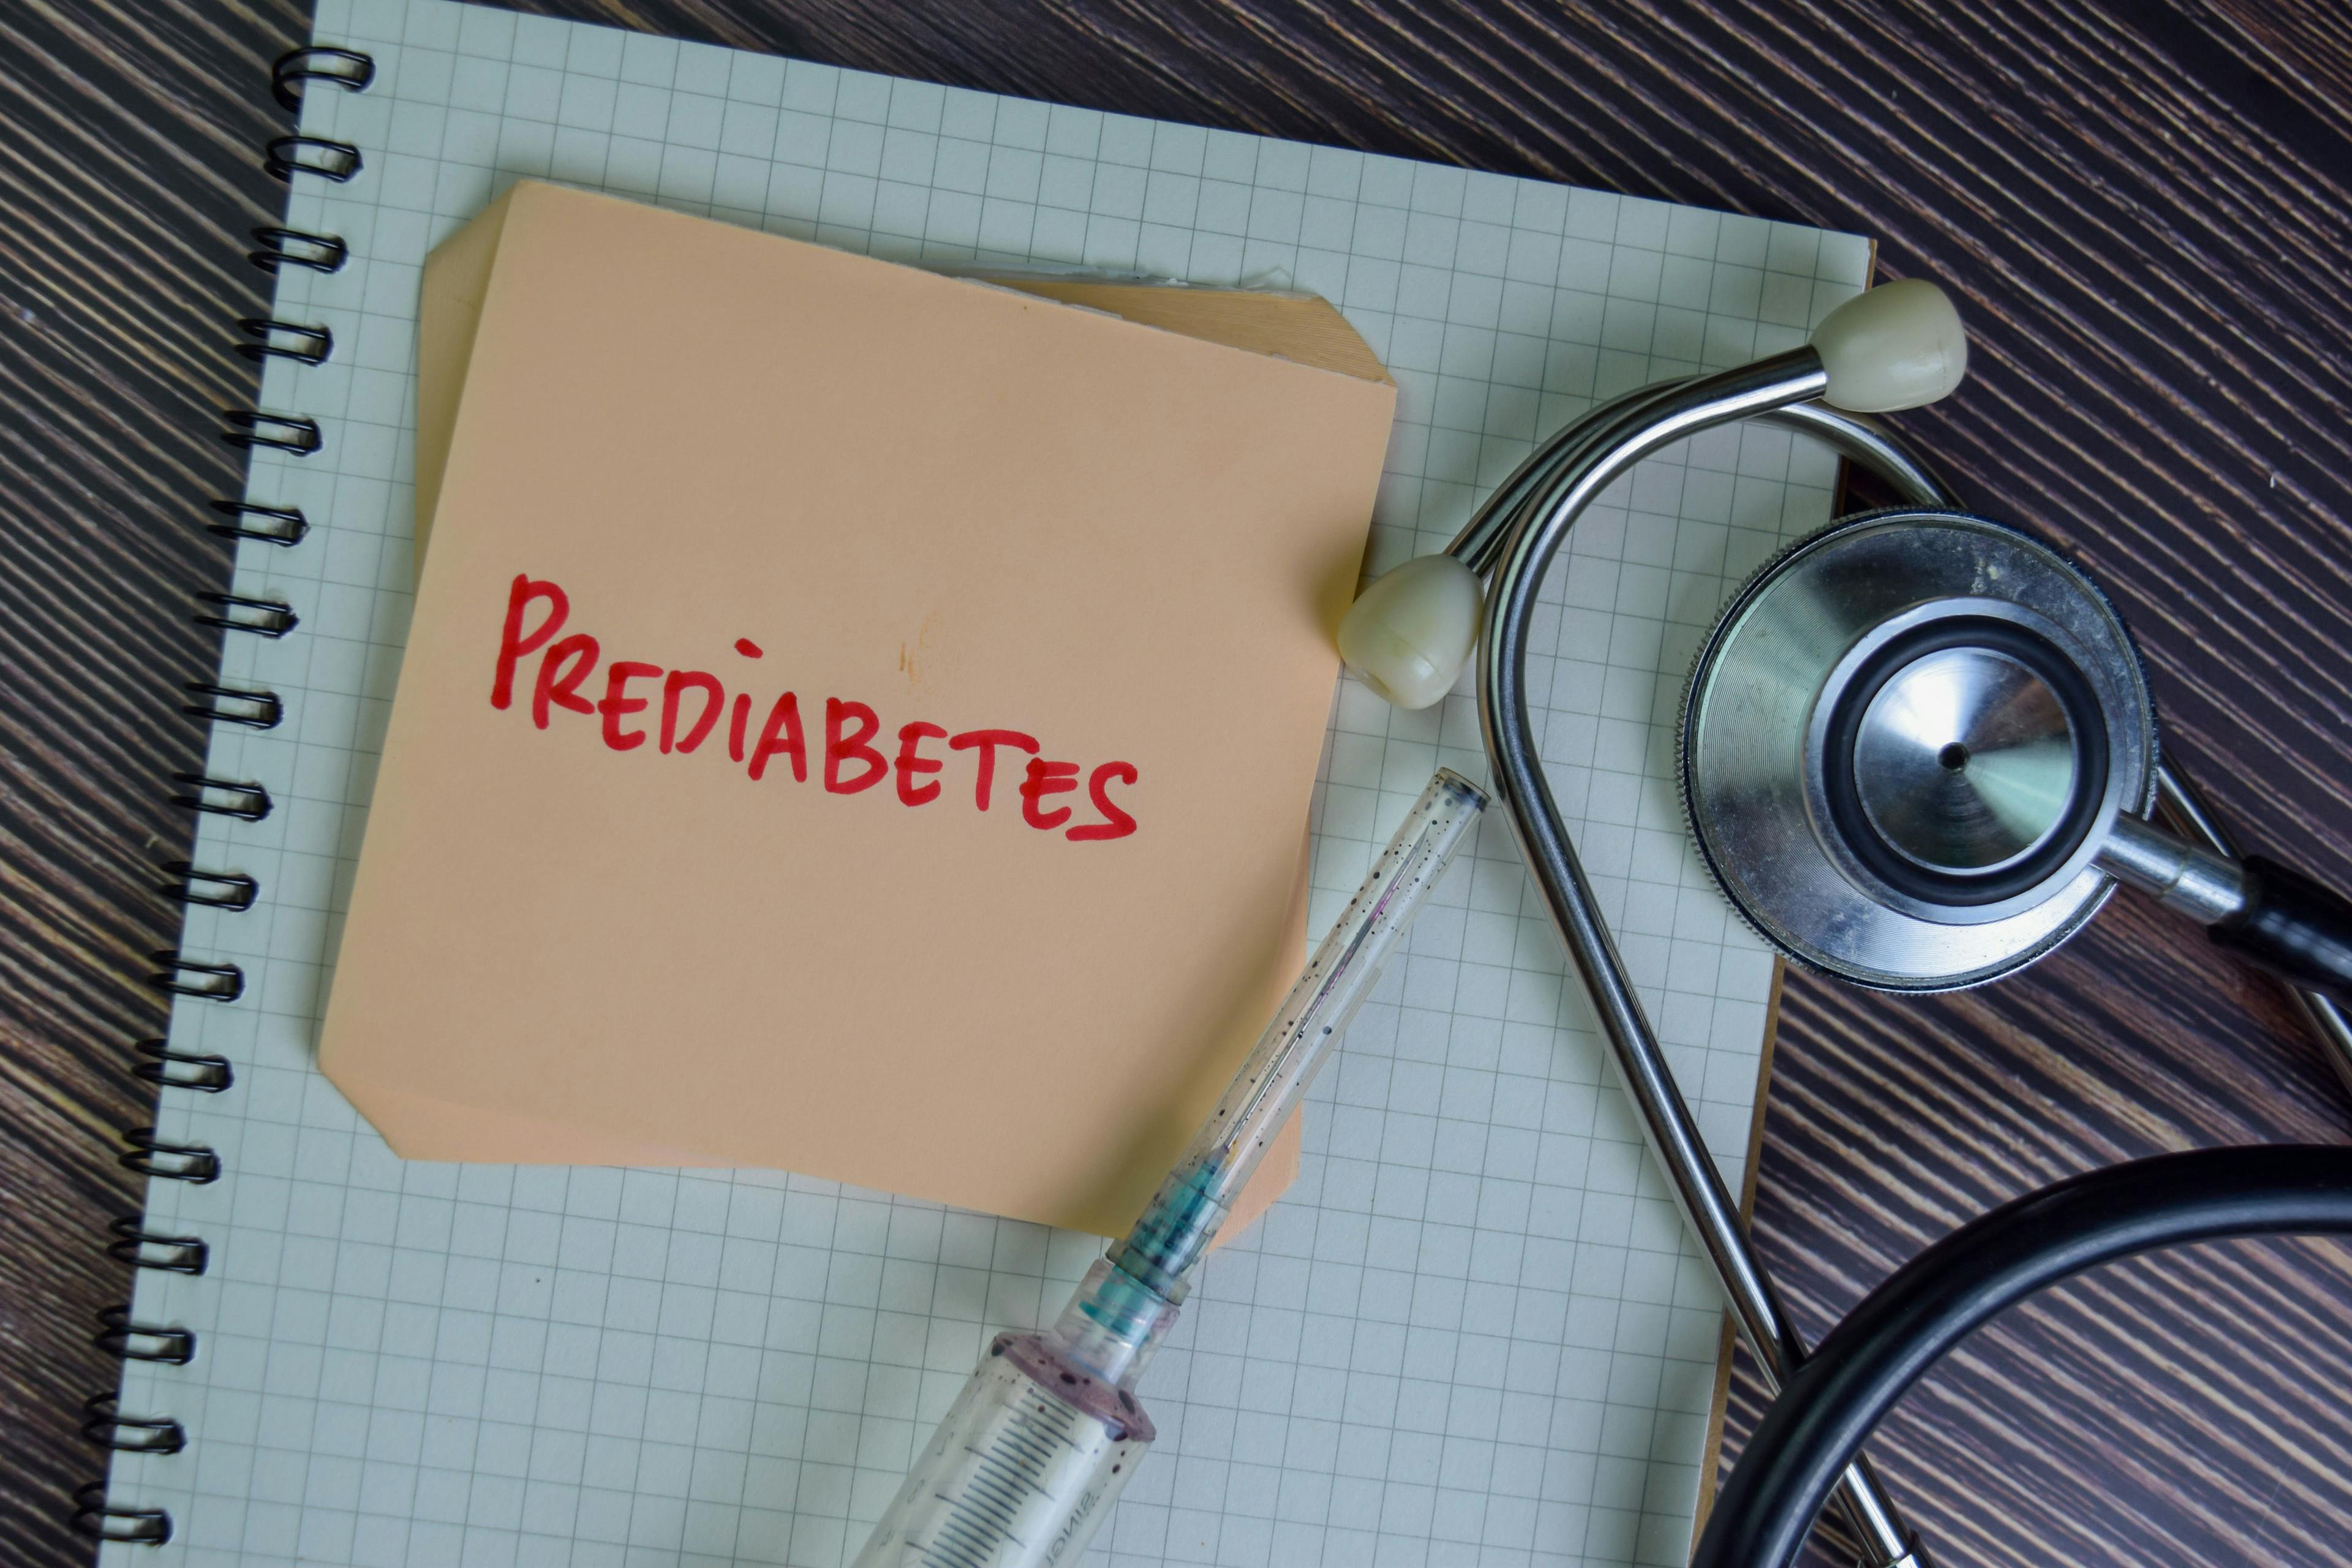 Prediabetes write on sticky notes isolated on Wooden Table.